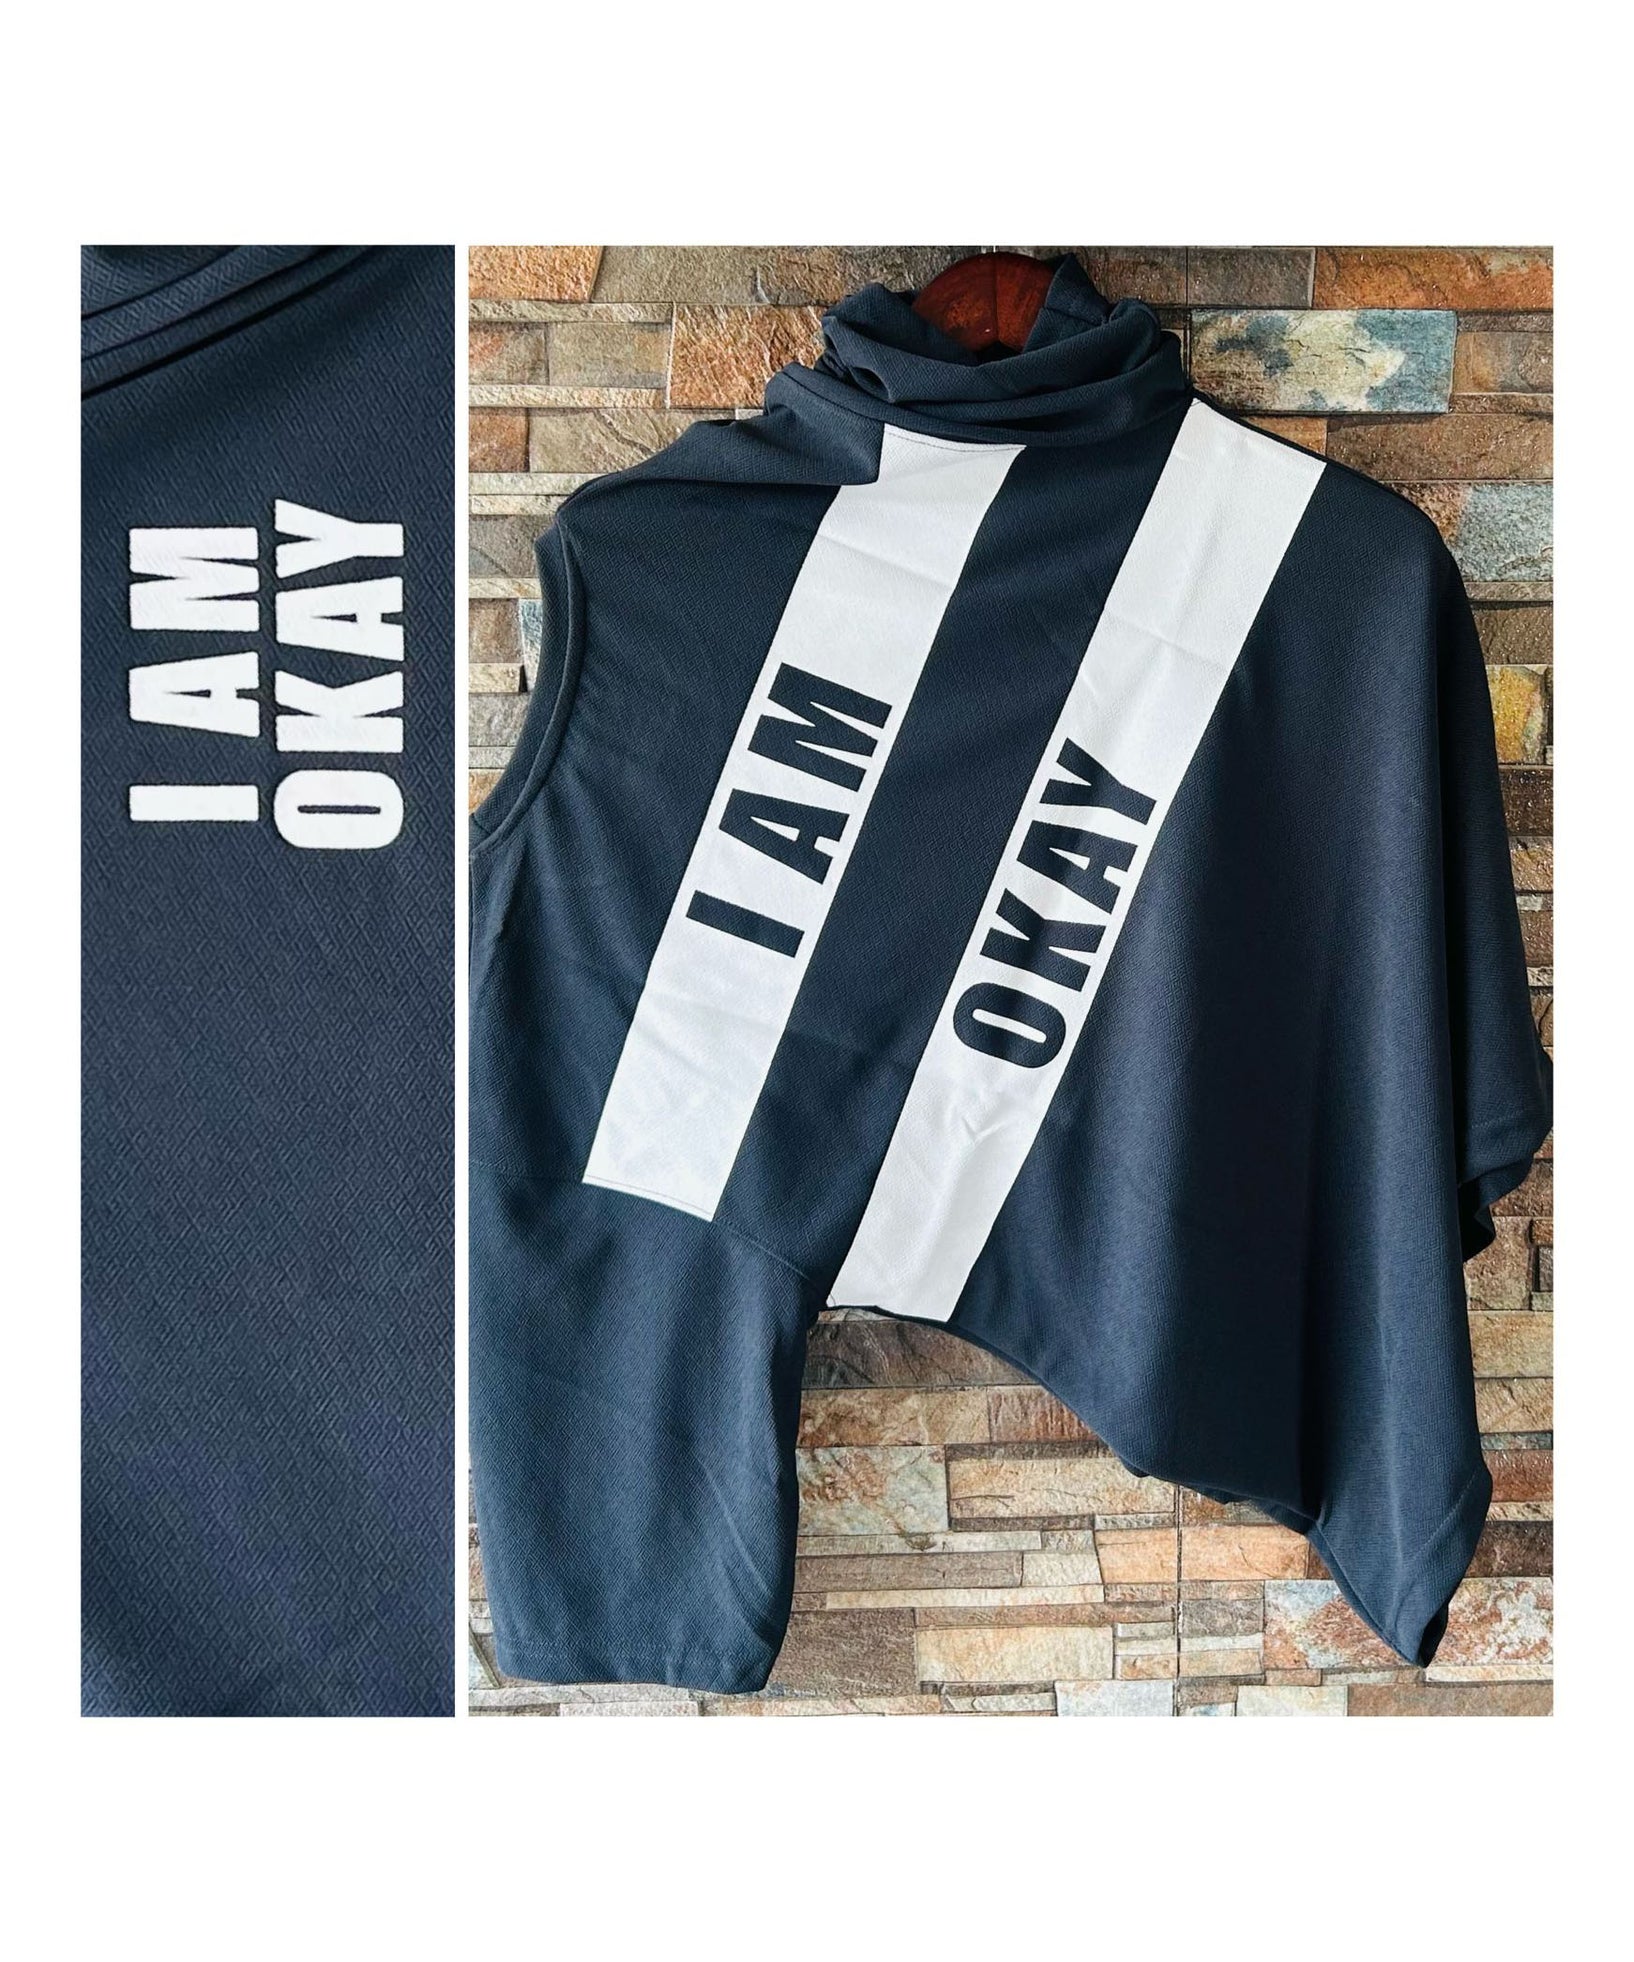 I Am OK Men's Printed Oversized T Shirt Crepe Lycra Fabric With Print